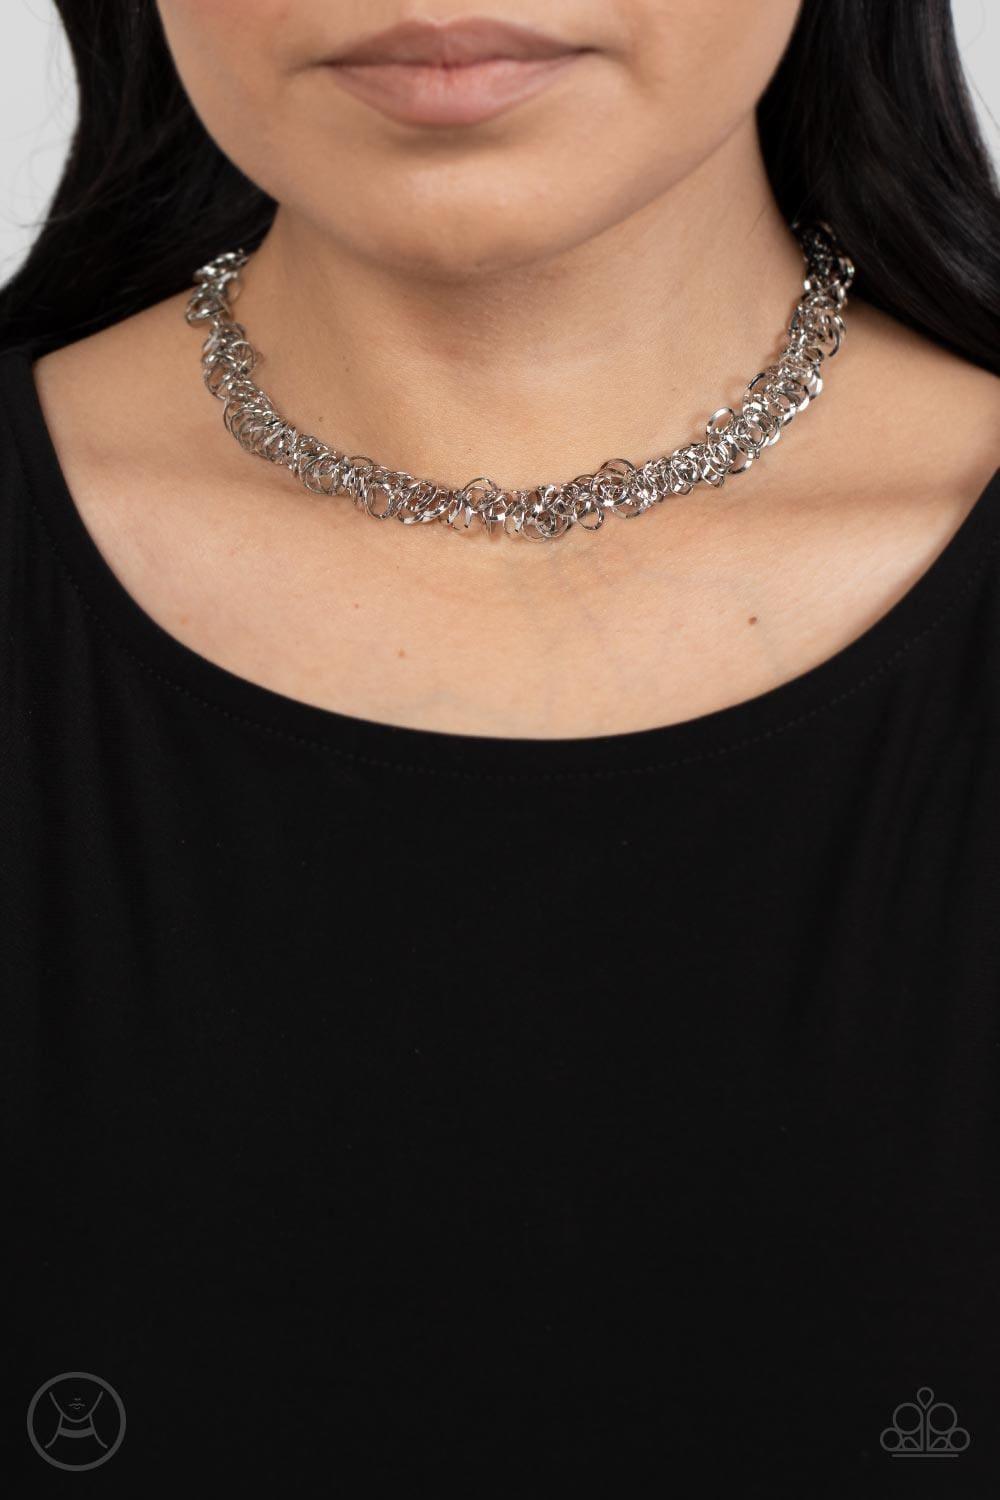 Paparazzi Accessories - Cause a Commotion - Silver Choker Necklace - Bling by JessieK